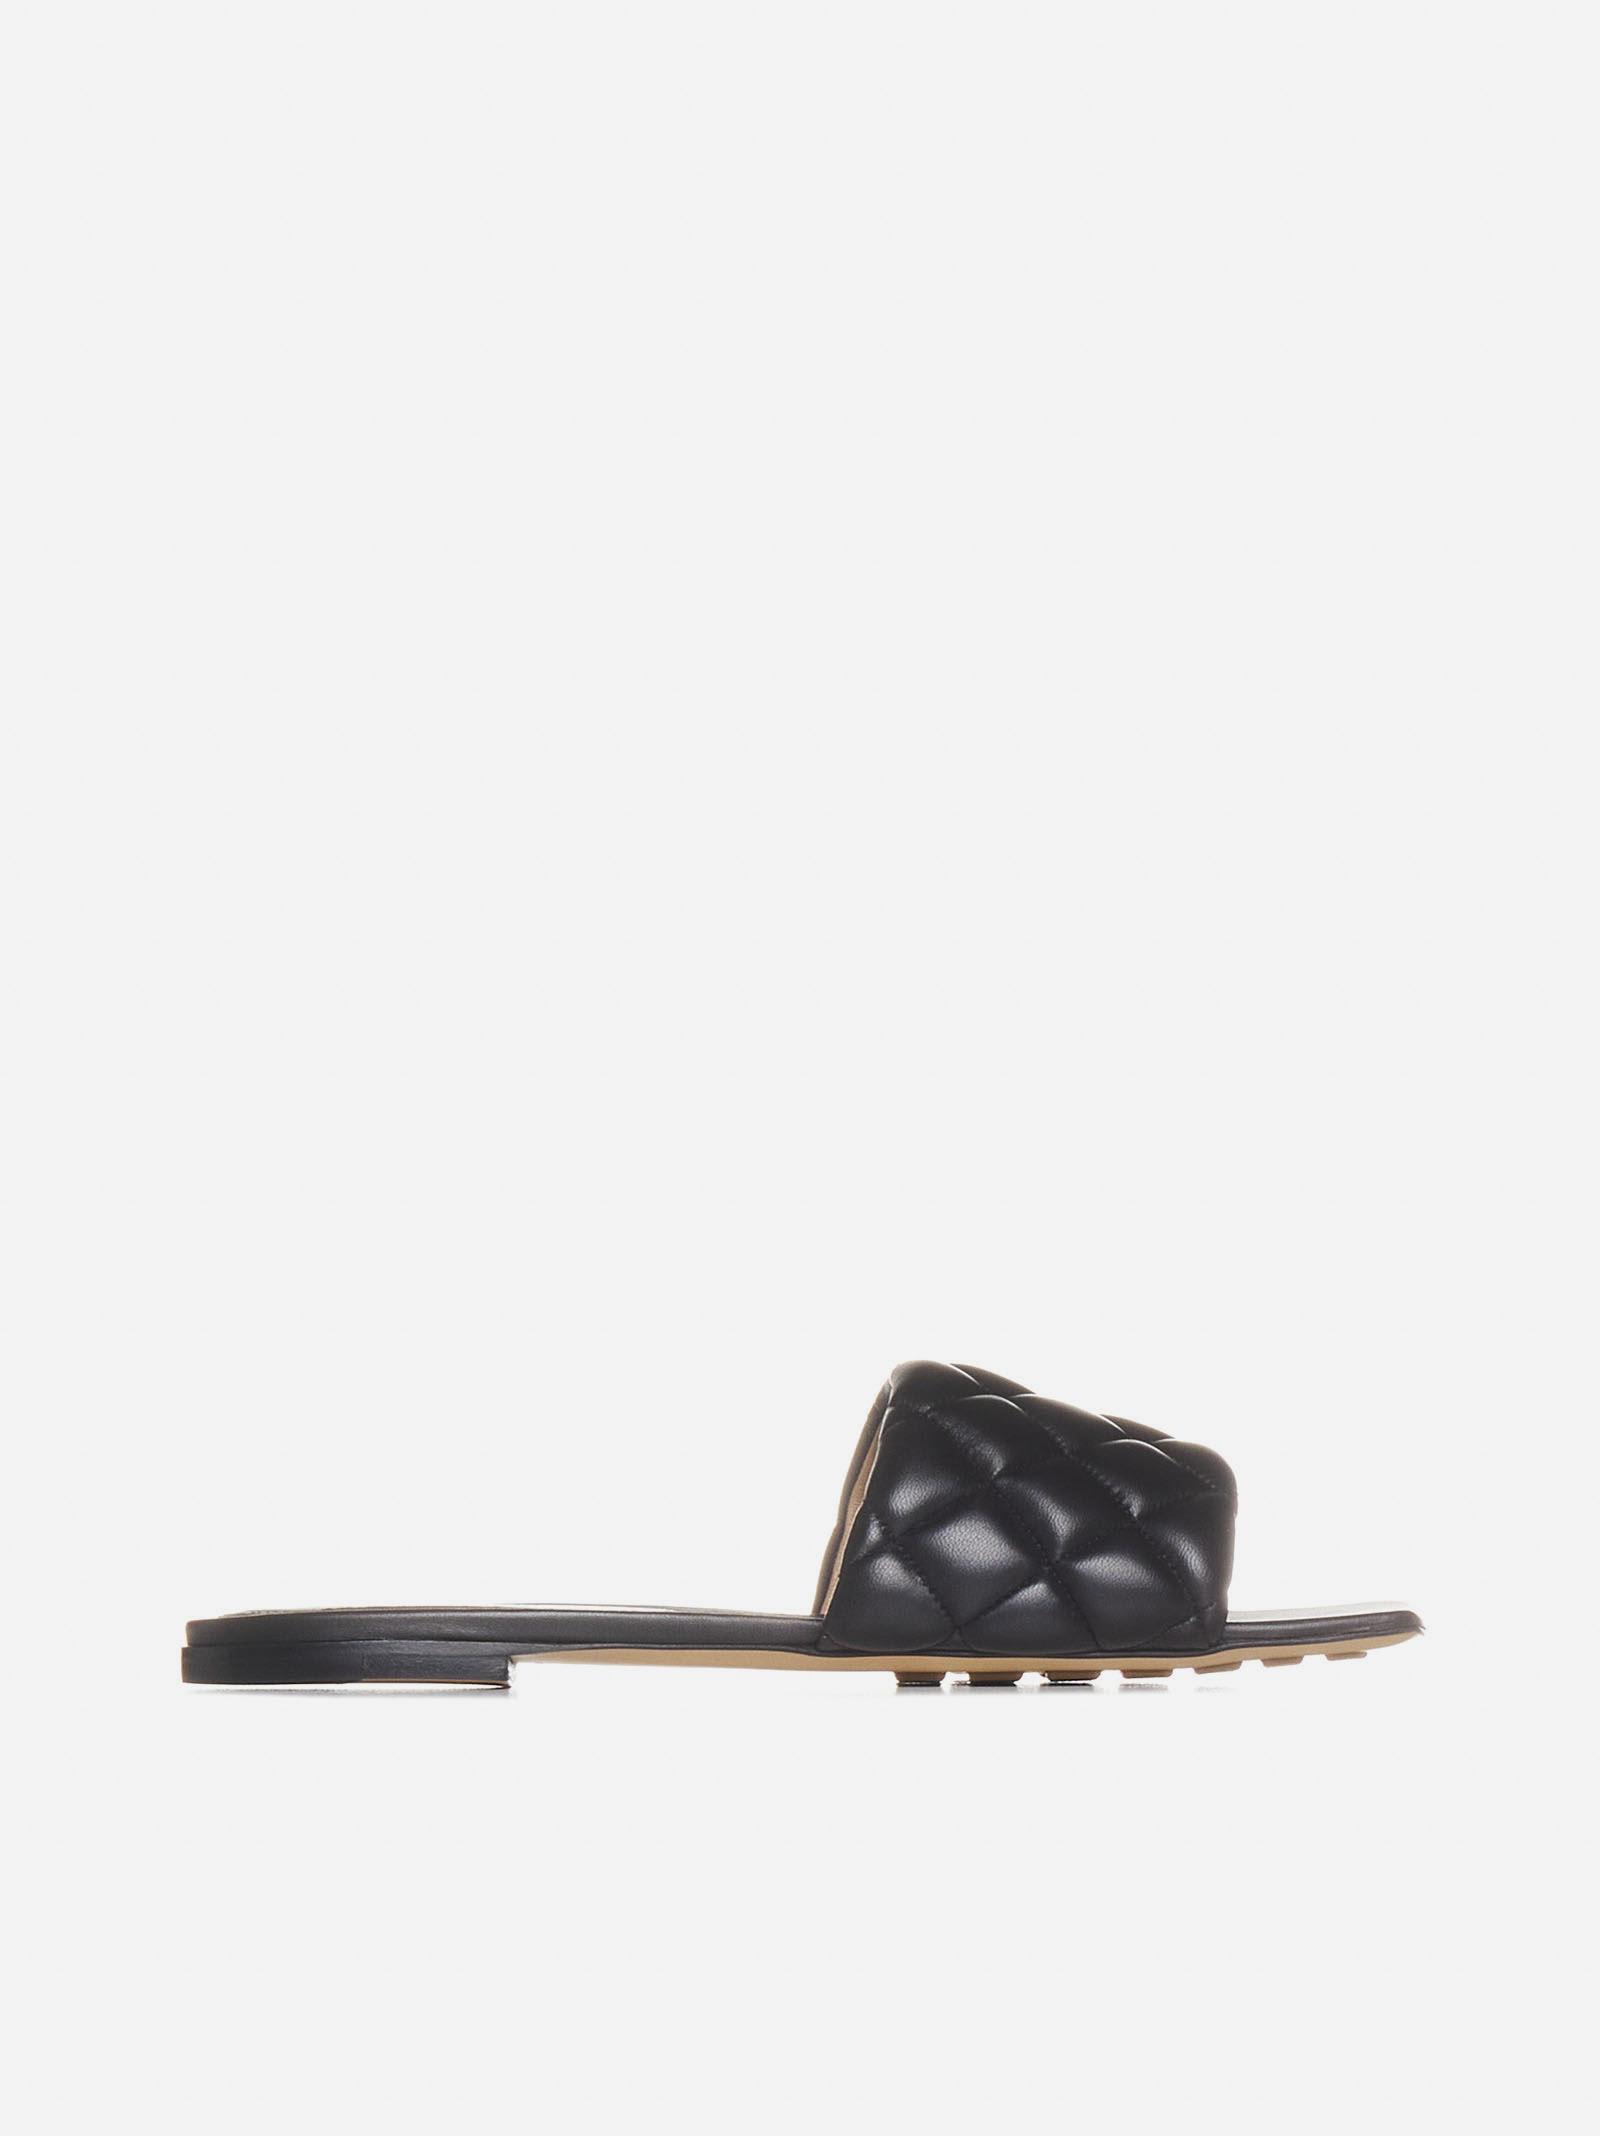 Padded Intrecciato Leather Flat Sandals